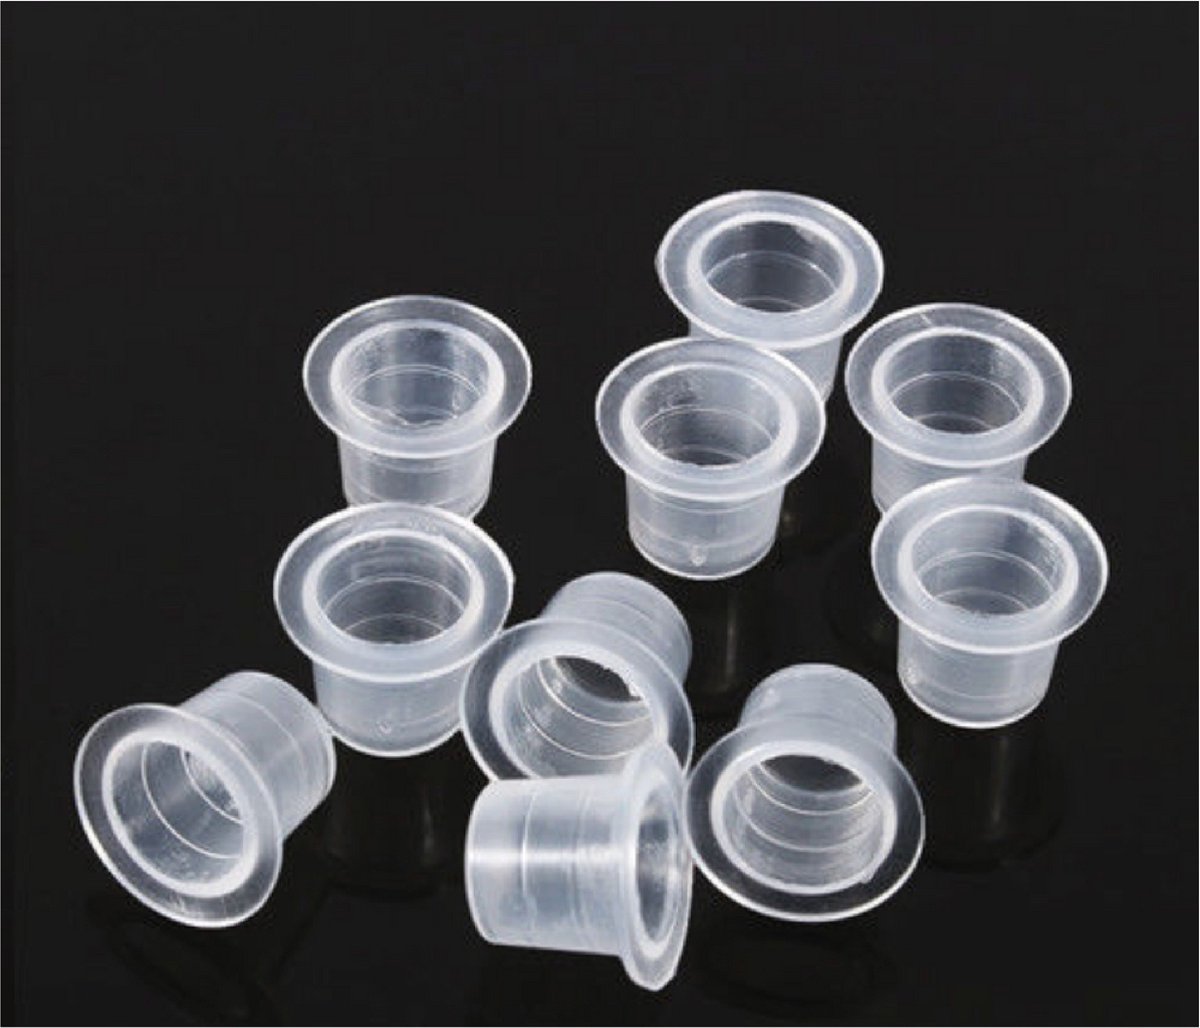 Pigmentcups M in plastic (100 pcs) - disposable tattoo inkt cup size M - PMU cup